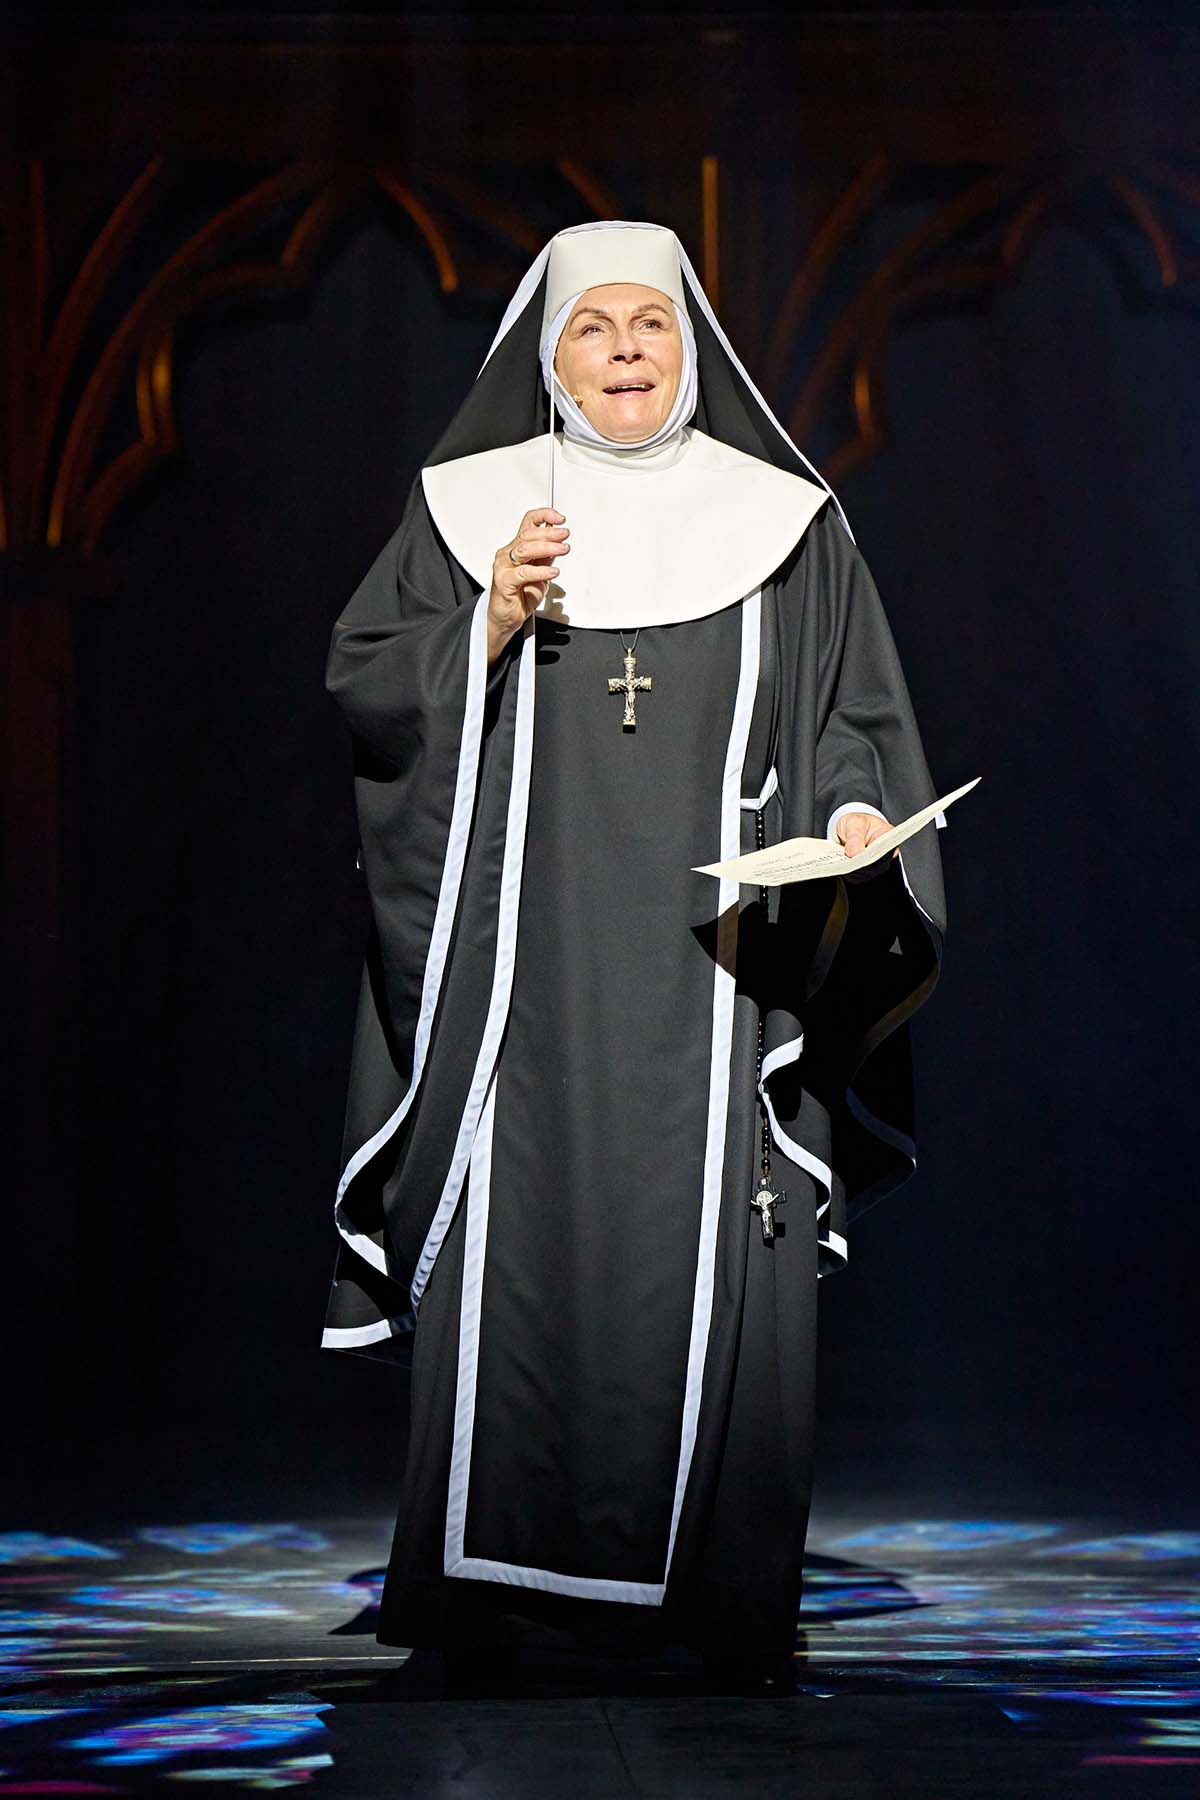 SISTER ACT. Jennifer Saunders 'Mother Superior'. Photo by Manuel Harlan